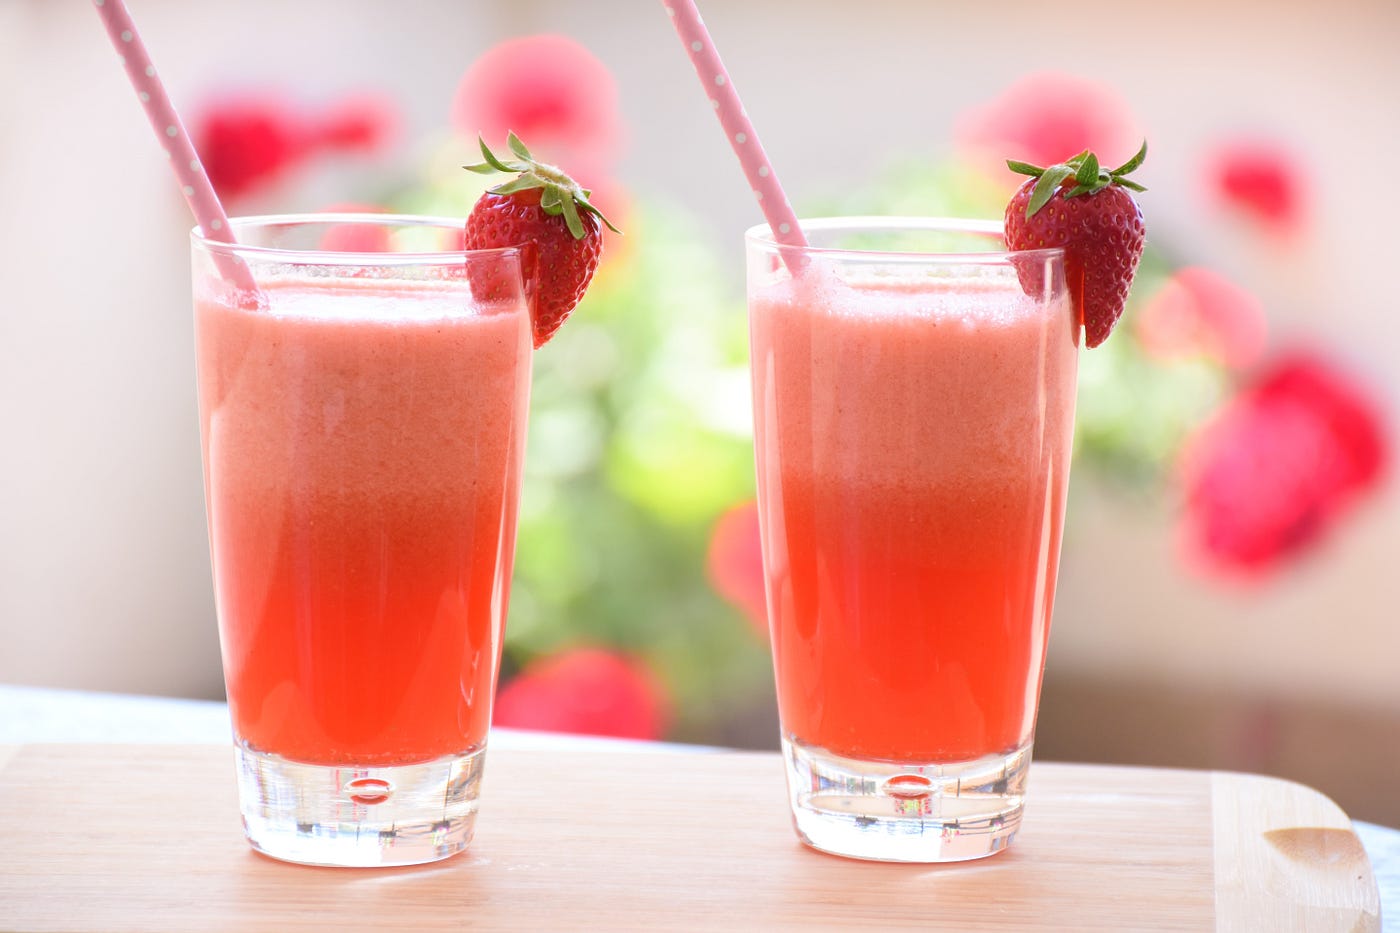 Two glasses on a counter filled with strawberry juice with a freash strawberry on the side of the glass and a cute pink straw.